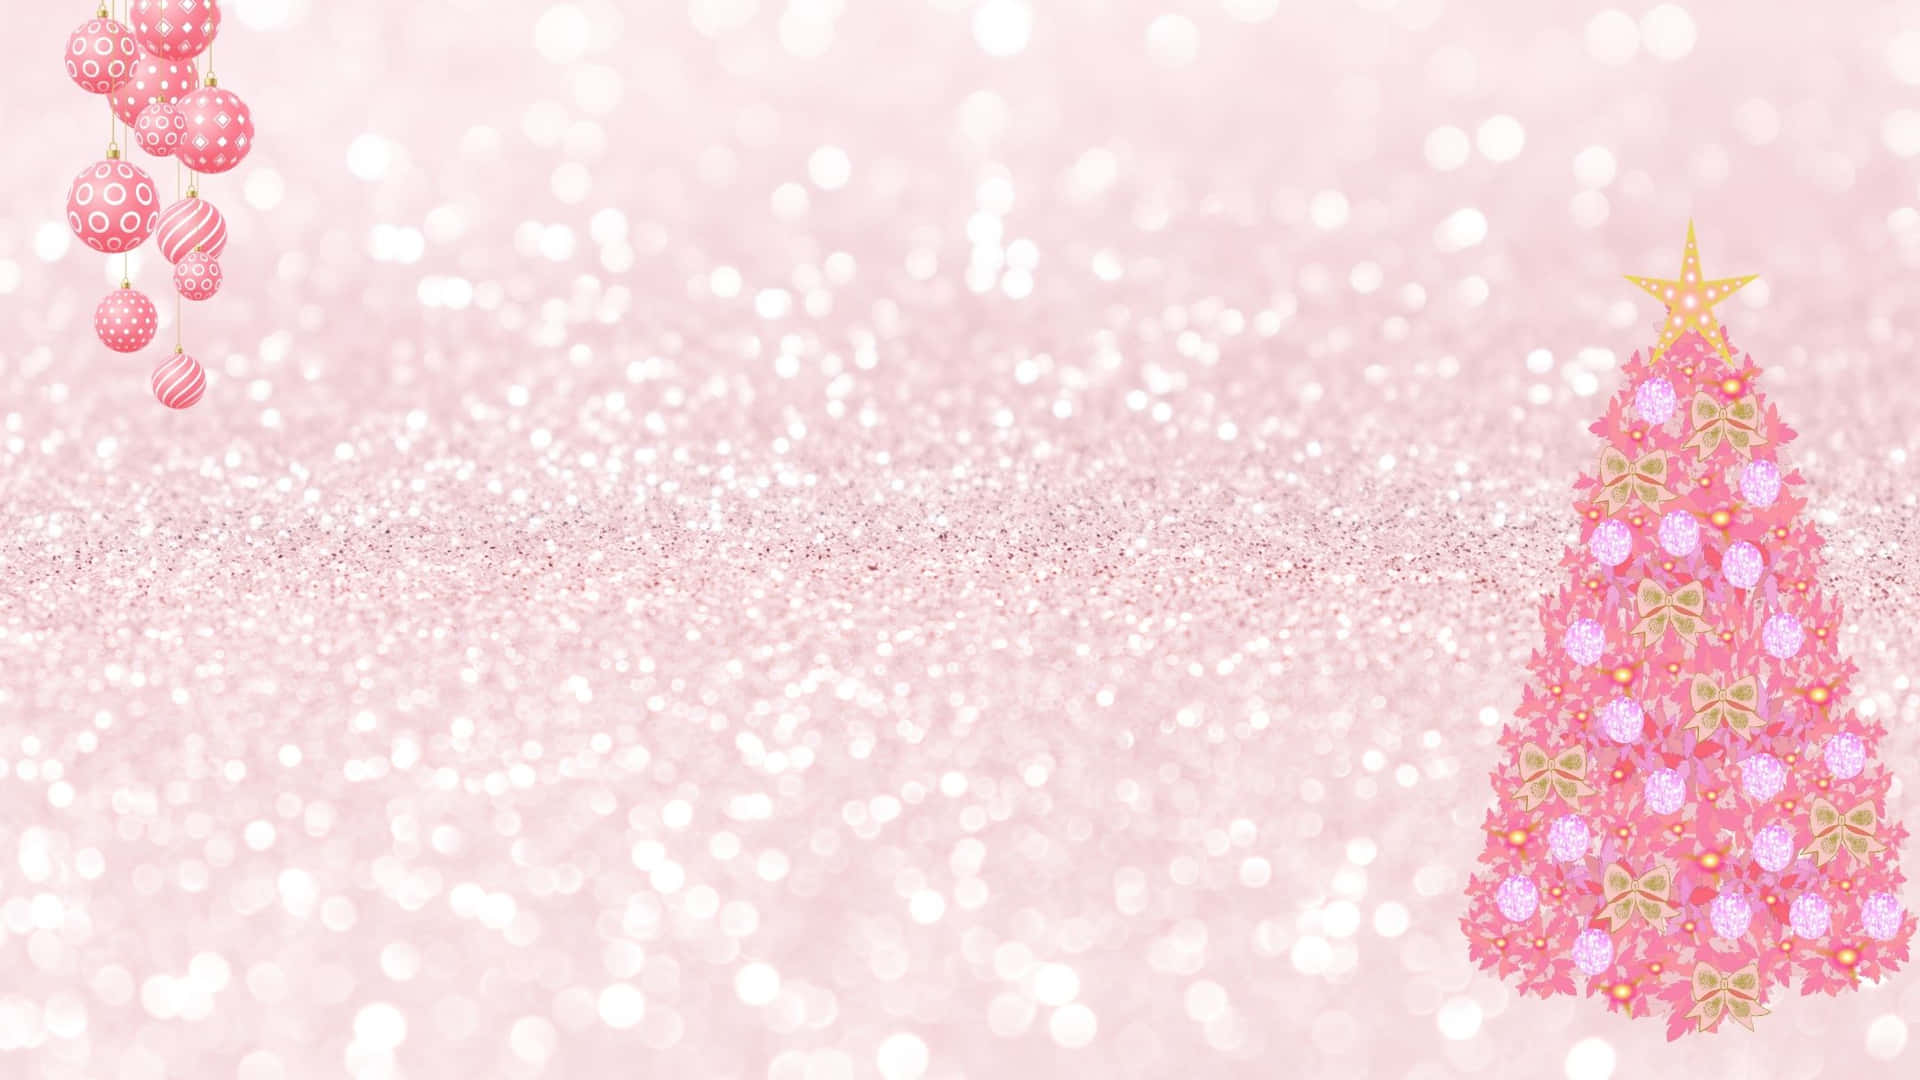 A Pink Christmas Tree With Gold Ornaments On A Glitter Background